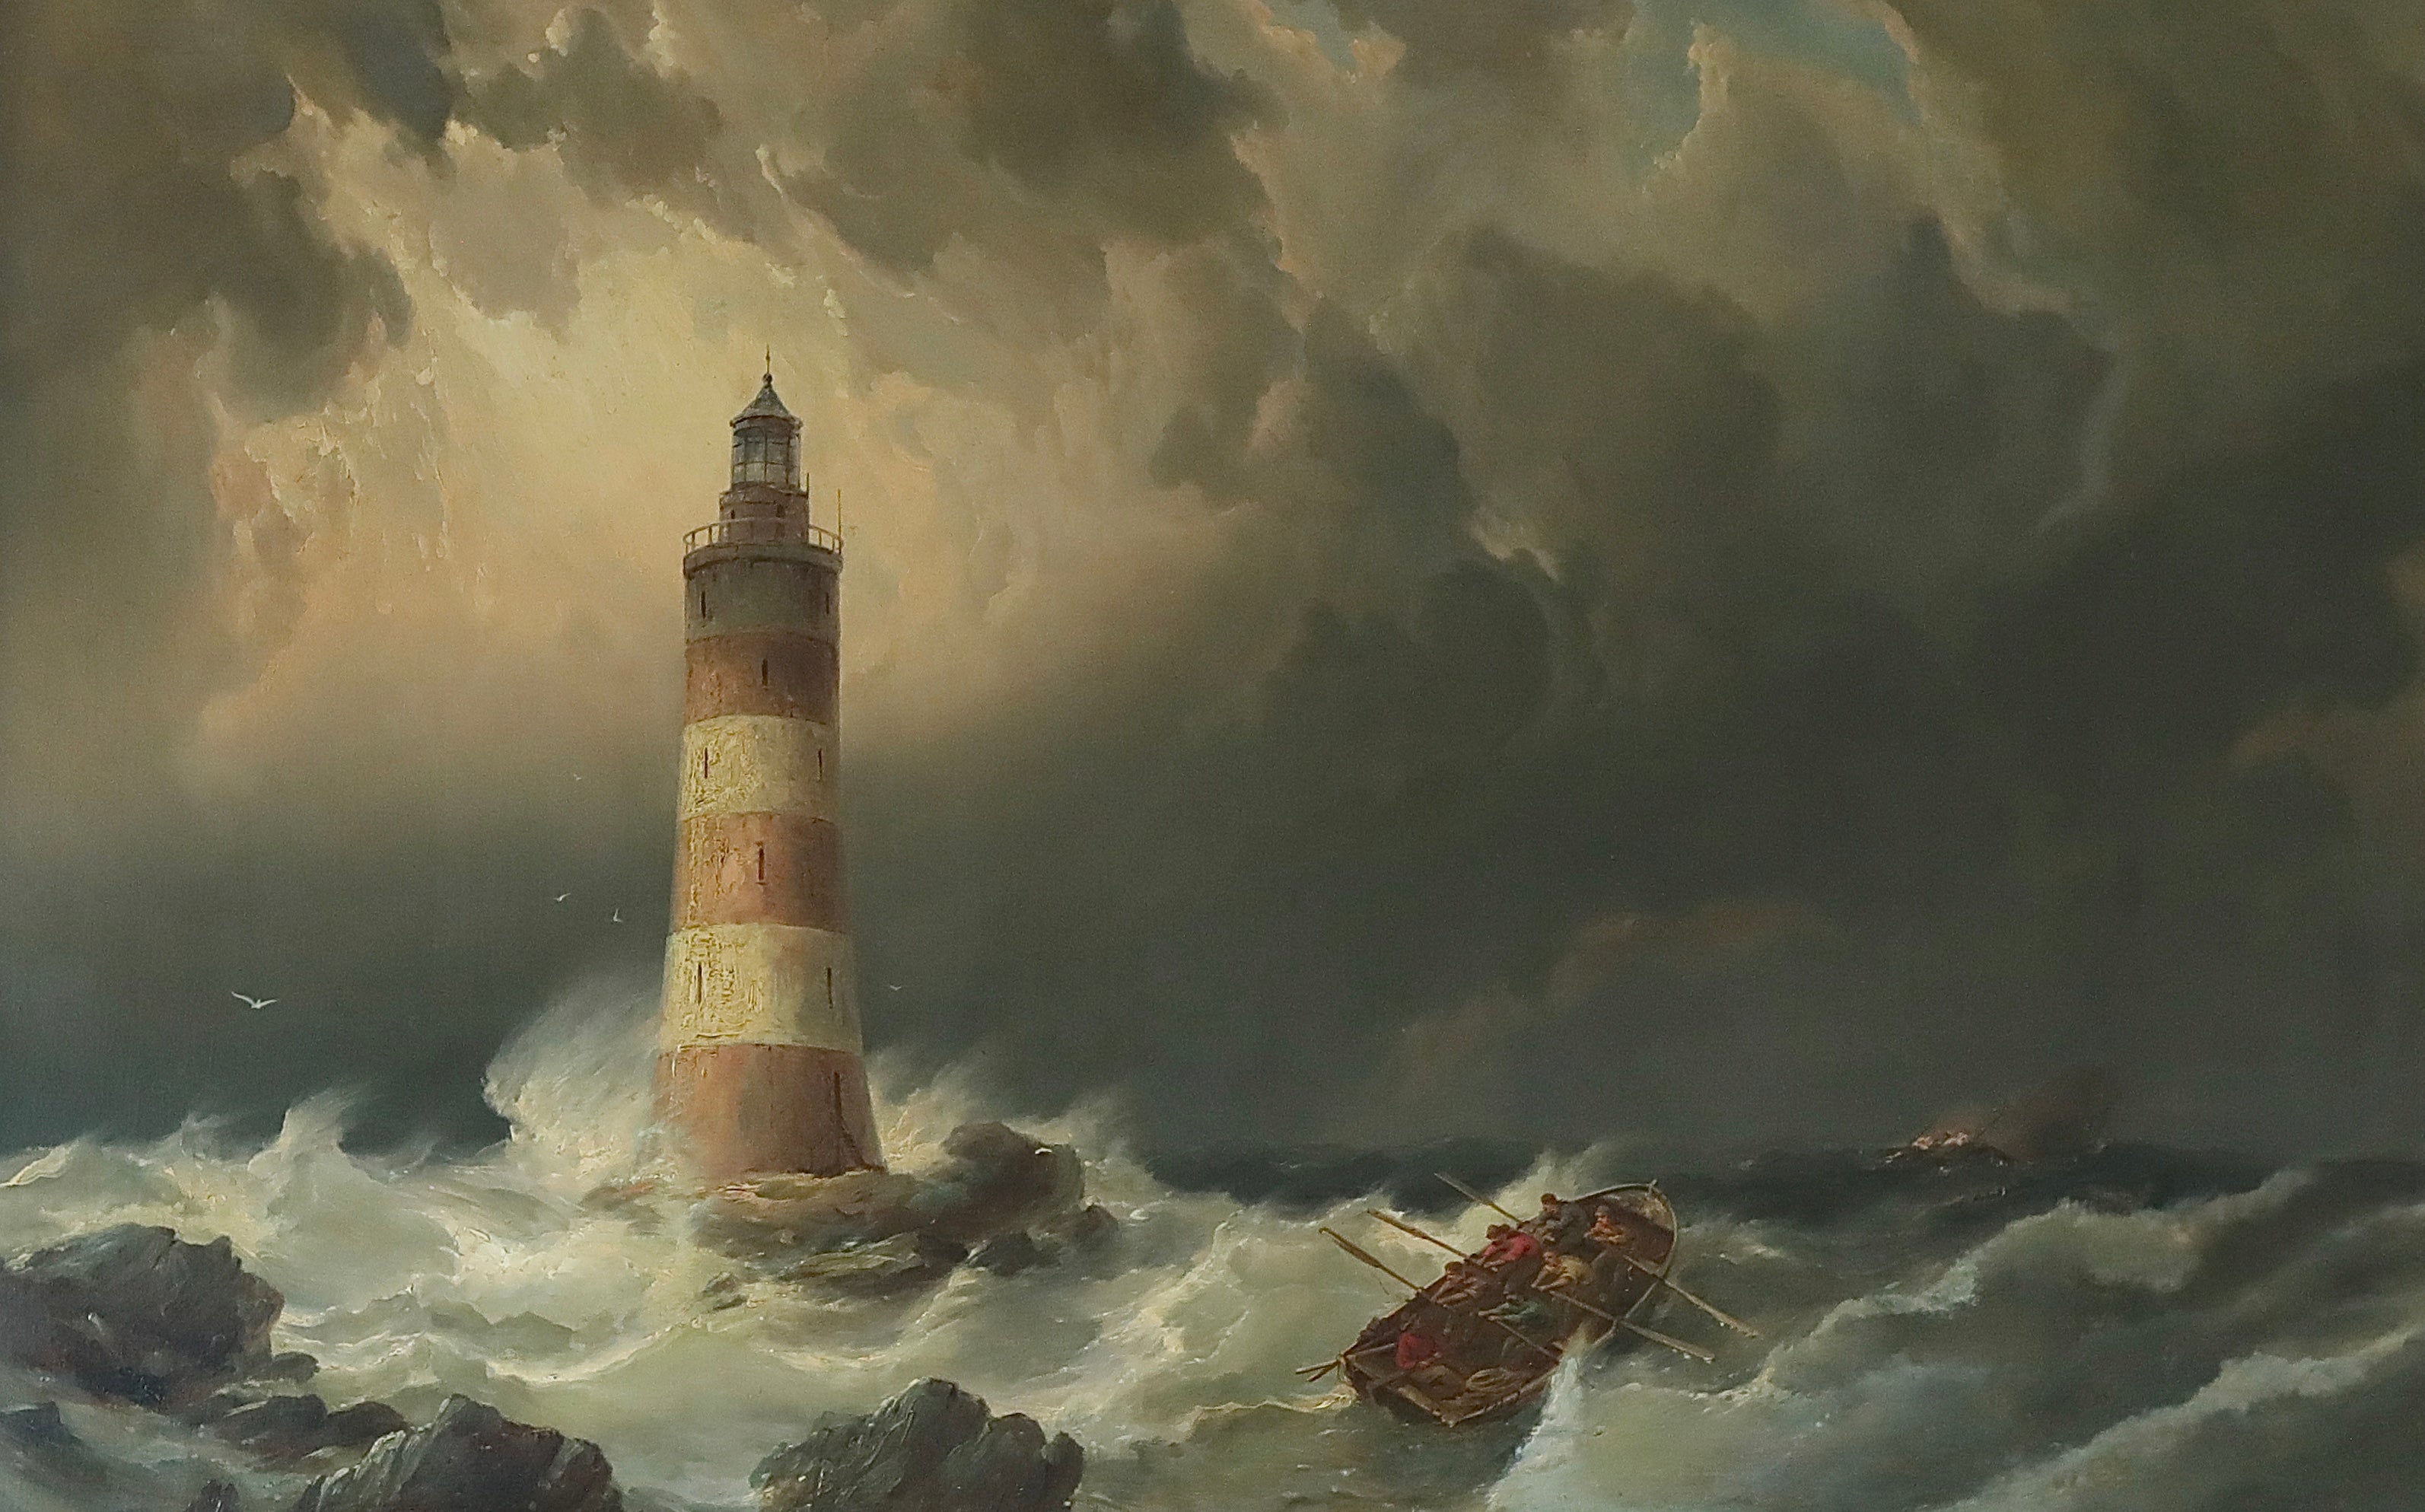 EYE CATCHING PAINTING OF LIGHTHOUSE IN A STORM